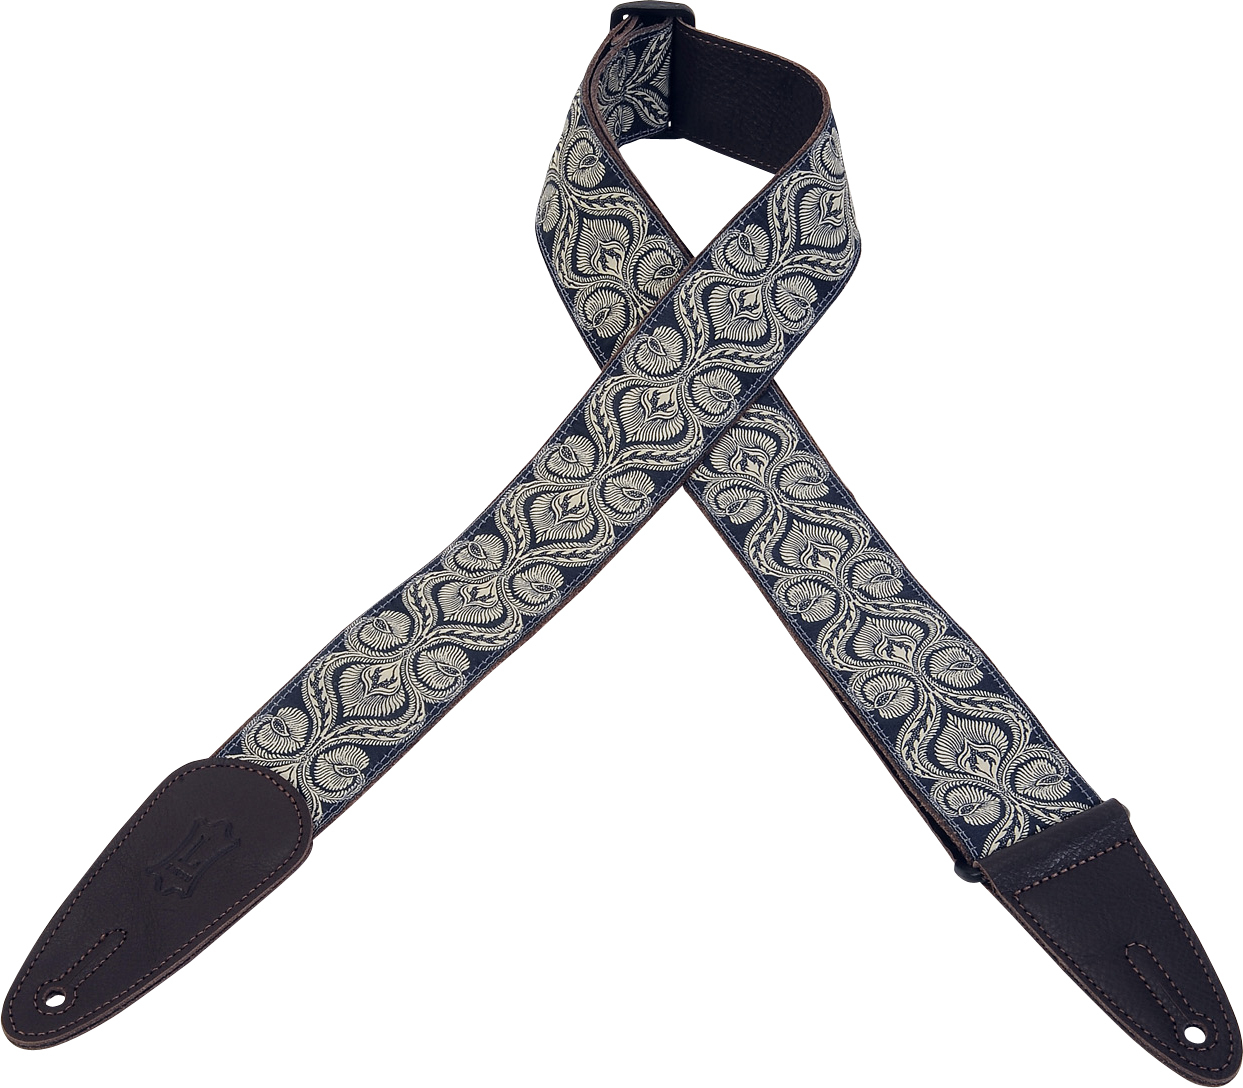 Levy's Mgj-001 - Guitar strap - Main picture